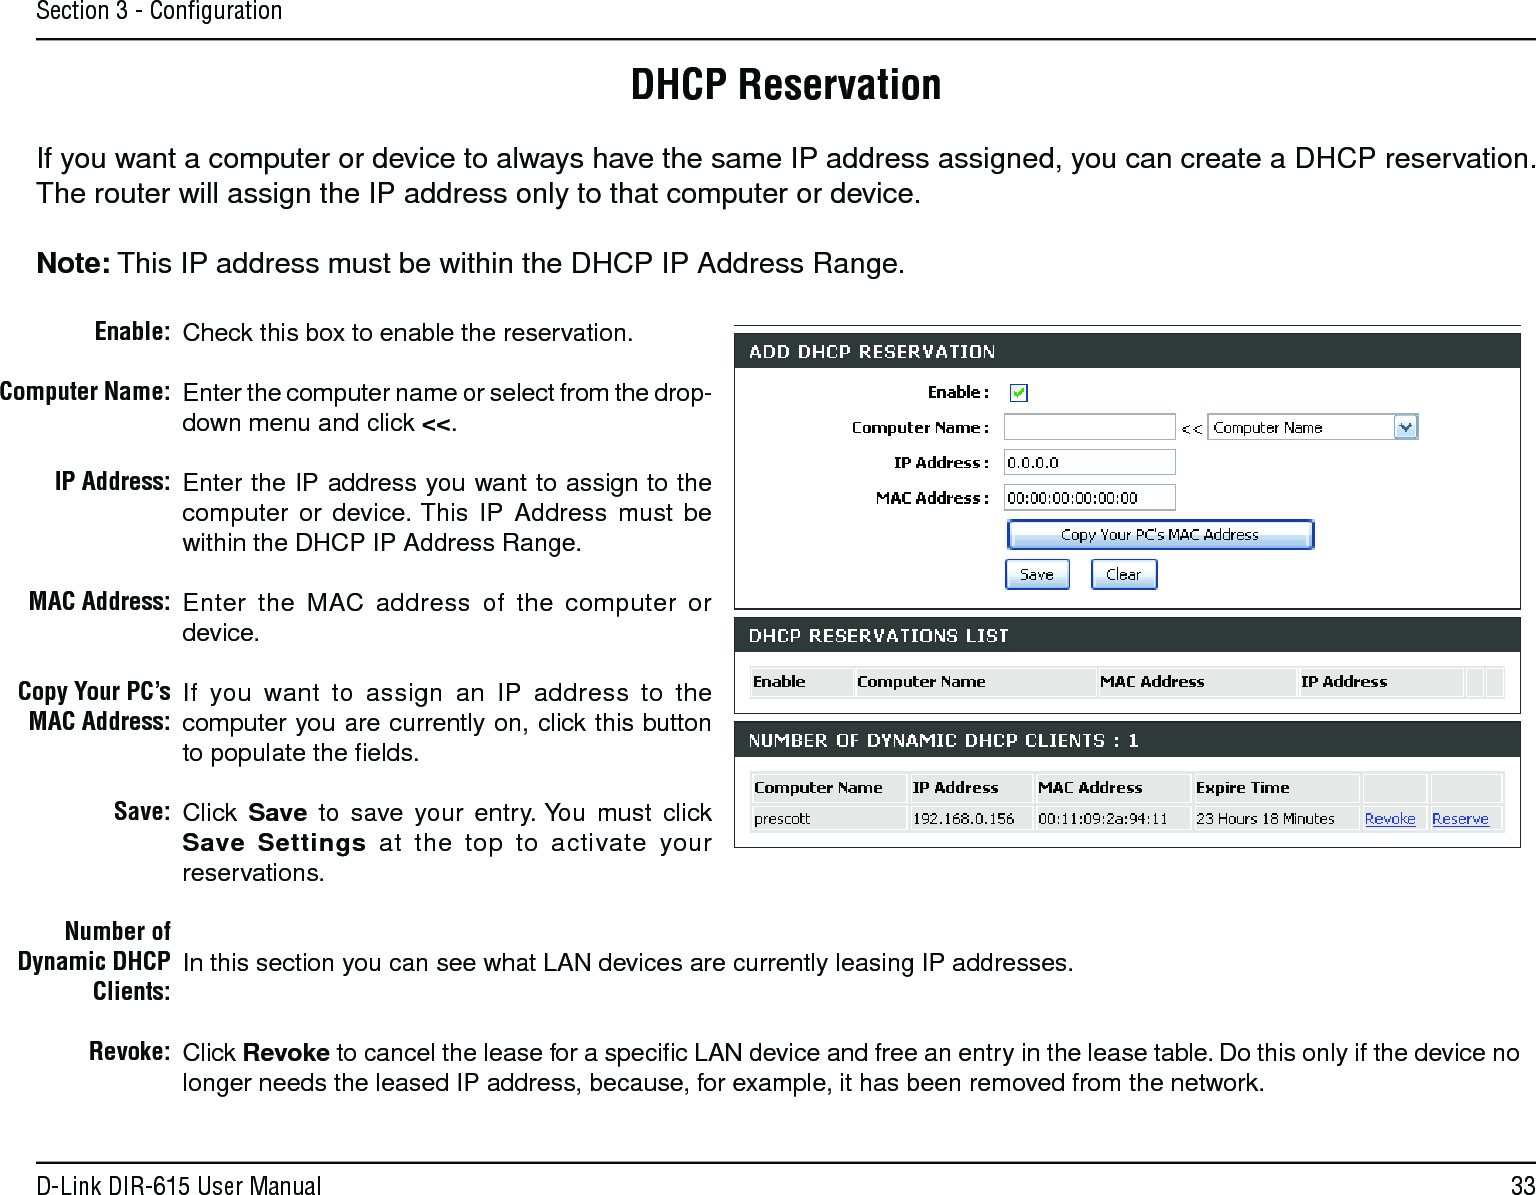 33D-Link DIR-615 User ManualSection 3 - ConﬁgurationDHCP ReservationIf you want a computer or device to always have the same IP address assigned, you can create a DHCP reservation. The router will assign the IP address only to that computer or device. Note: This IP address must be within the DHCP IP Address Range.Check this box to enable the reservation.Enter the computer name or select from the drop-down menu and click &lt;&lt;.Enter the IP address you want to assign to the computer  or  device. This  IP  Address  must  be within the DHCP IP Address Range.Enter  the  MAC  address  of  the  computer  or device.If  you  want  to  assign  an  IP  address  to  the computer you are currently on, click this button to populate the ﬁelds. Click  Save  to  save  your  entry. You  must  click Save  Settings  at  the  top  to  activate  your reservations. In this section you can see what LAN devices are currently leasing IP addresses.Click Revoke to cancel the lease for a speciﬁc LAN device and free an entry in the lease table. Do this only if the device no longer needs the leased IP address, because, for example, it has been removed from the network.Enable:Computer Name:IP Address:MAC Address:Copy Your PC’s MAC Address:Save:Number of Dynamic DHCP Clients:Revoke: